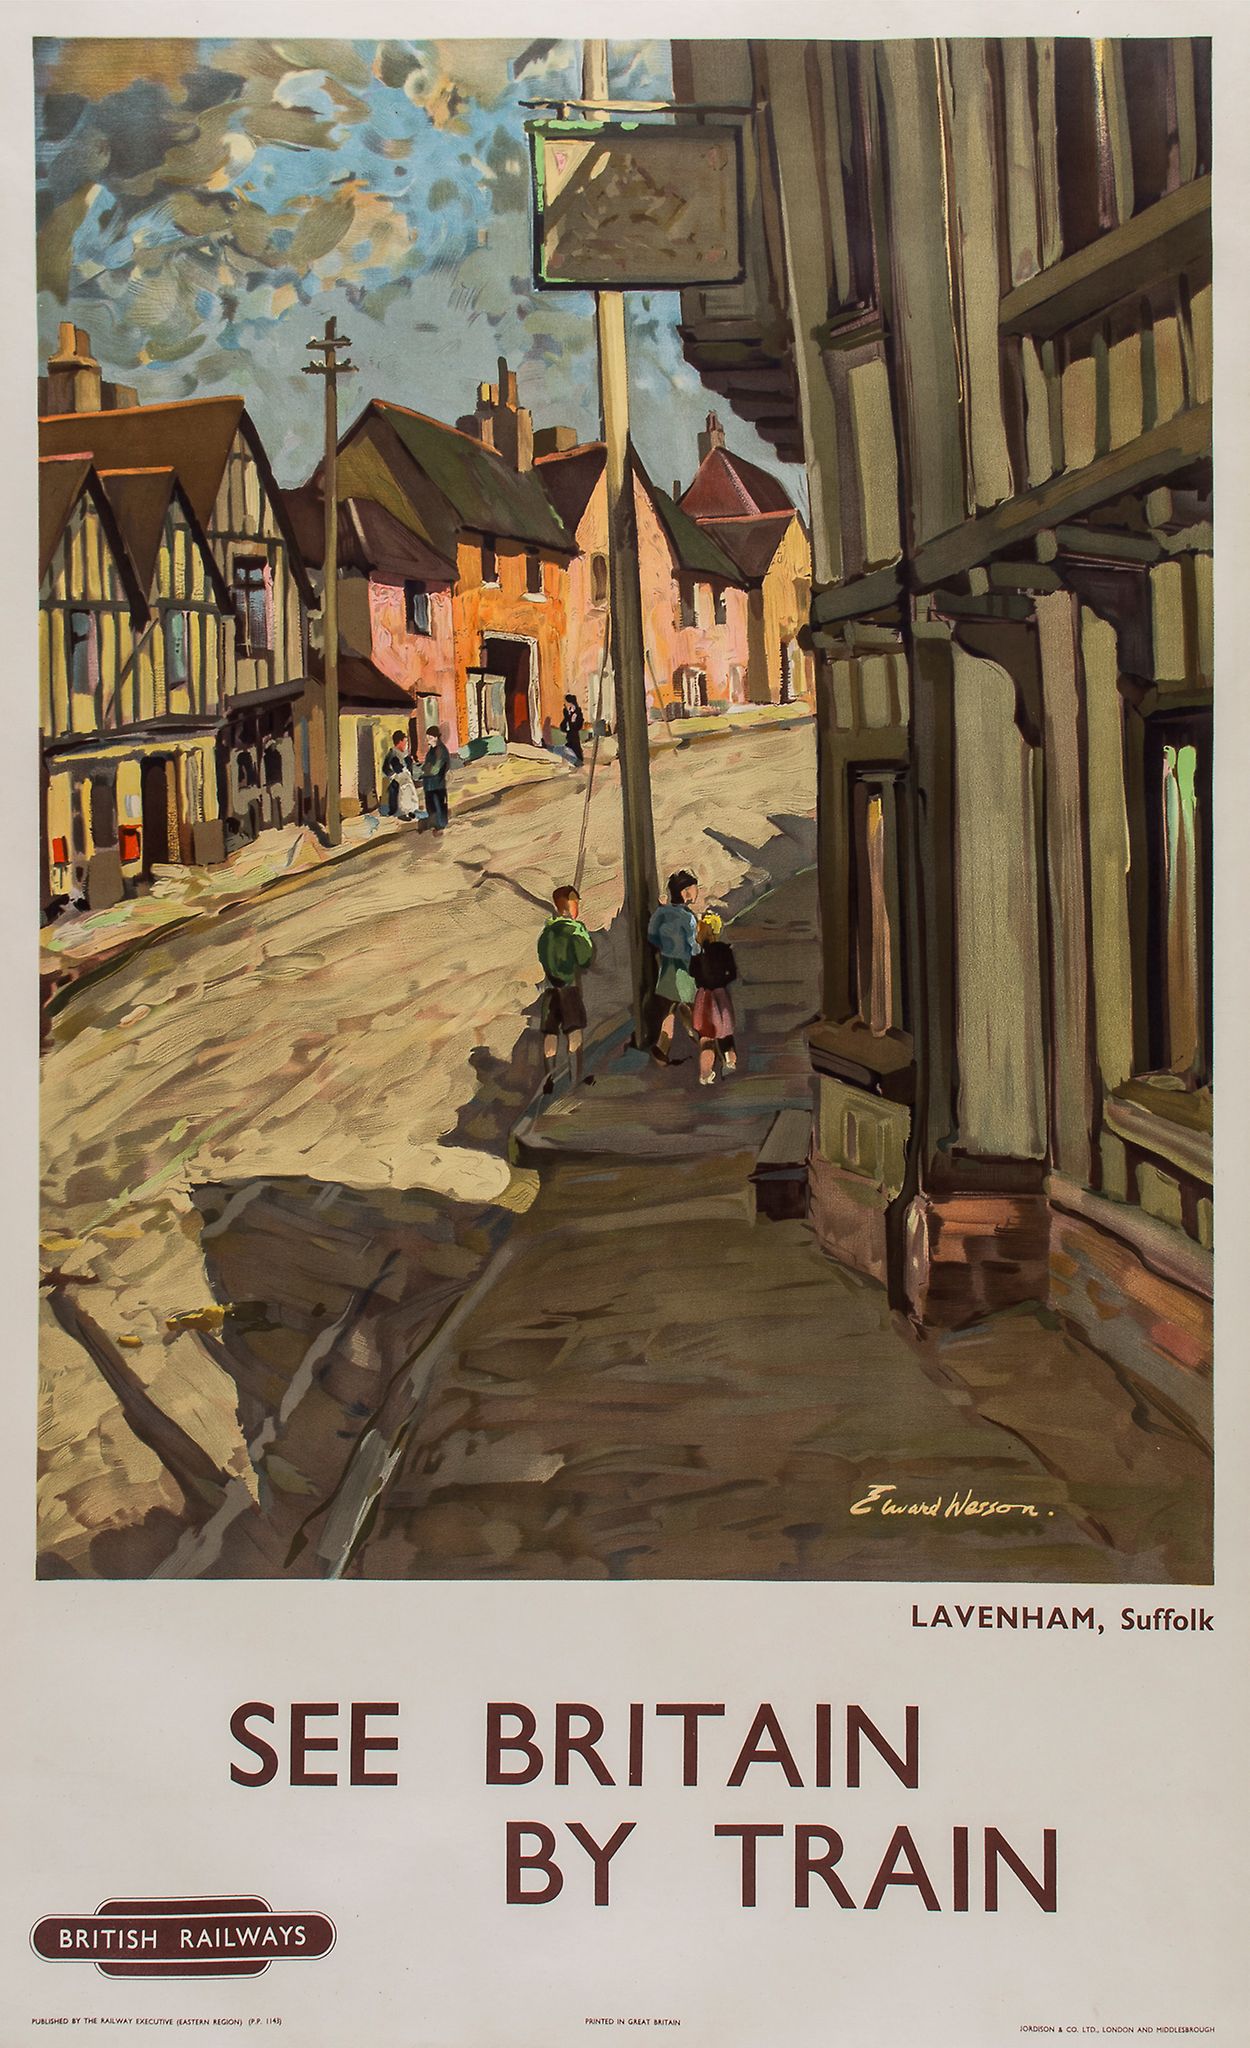 WESSON, Edward - SEE BRITAIN BY TRAIN, British Railways, Lavenham lithographic poster in colours,